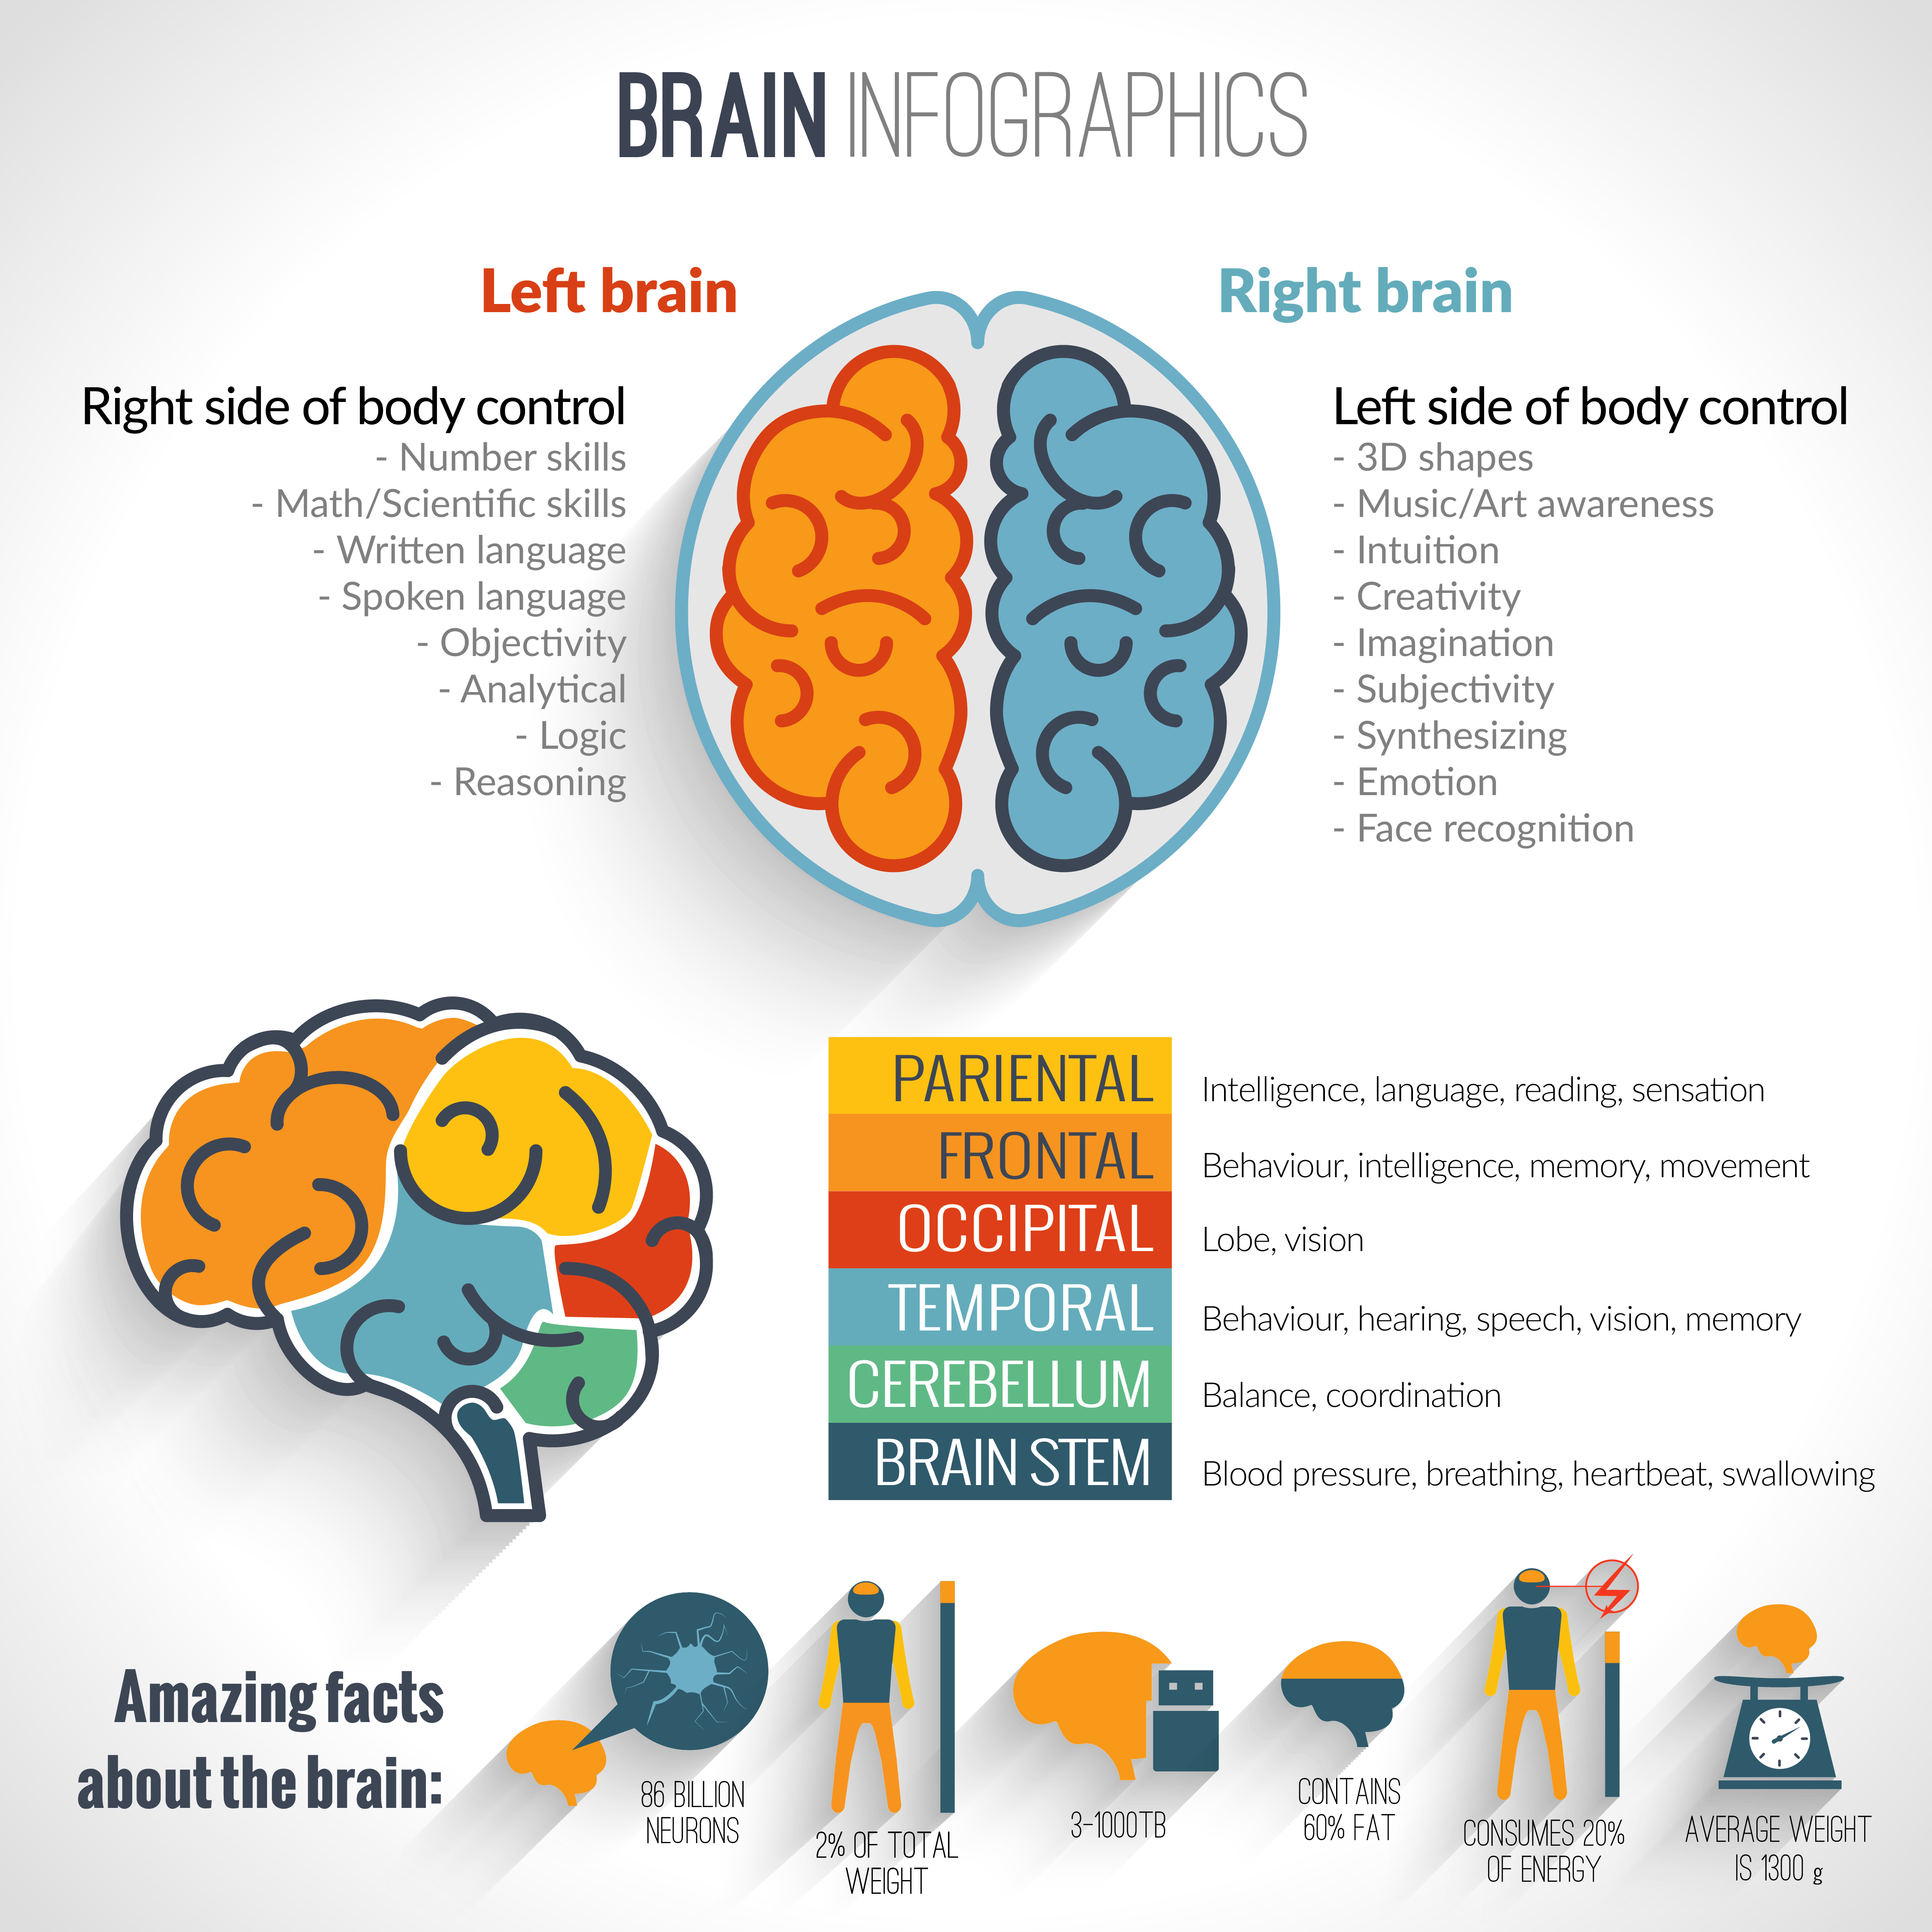 right-brain thinking also plays a vital role in the business world